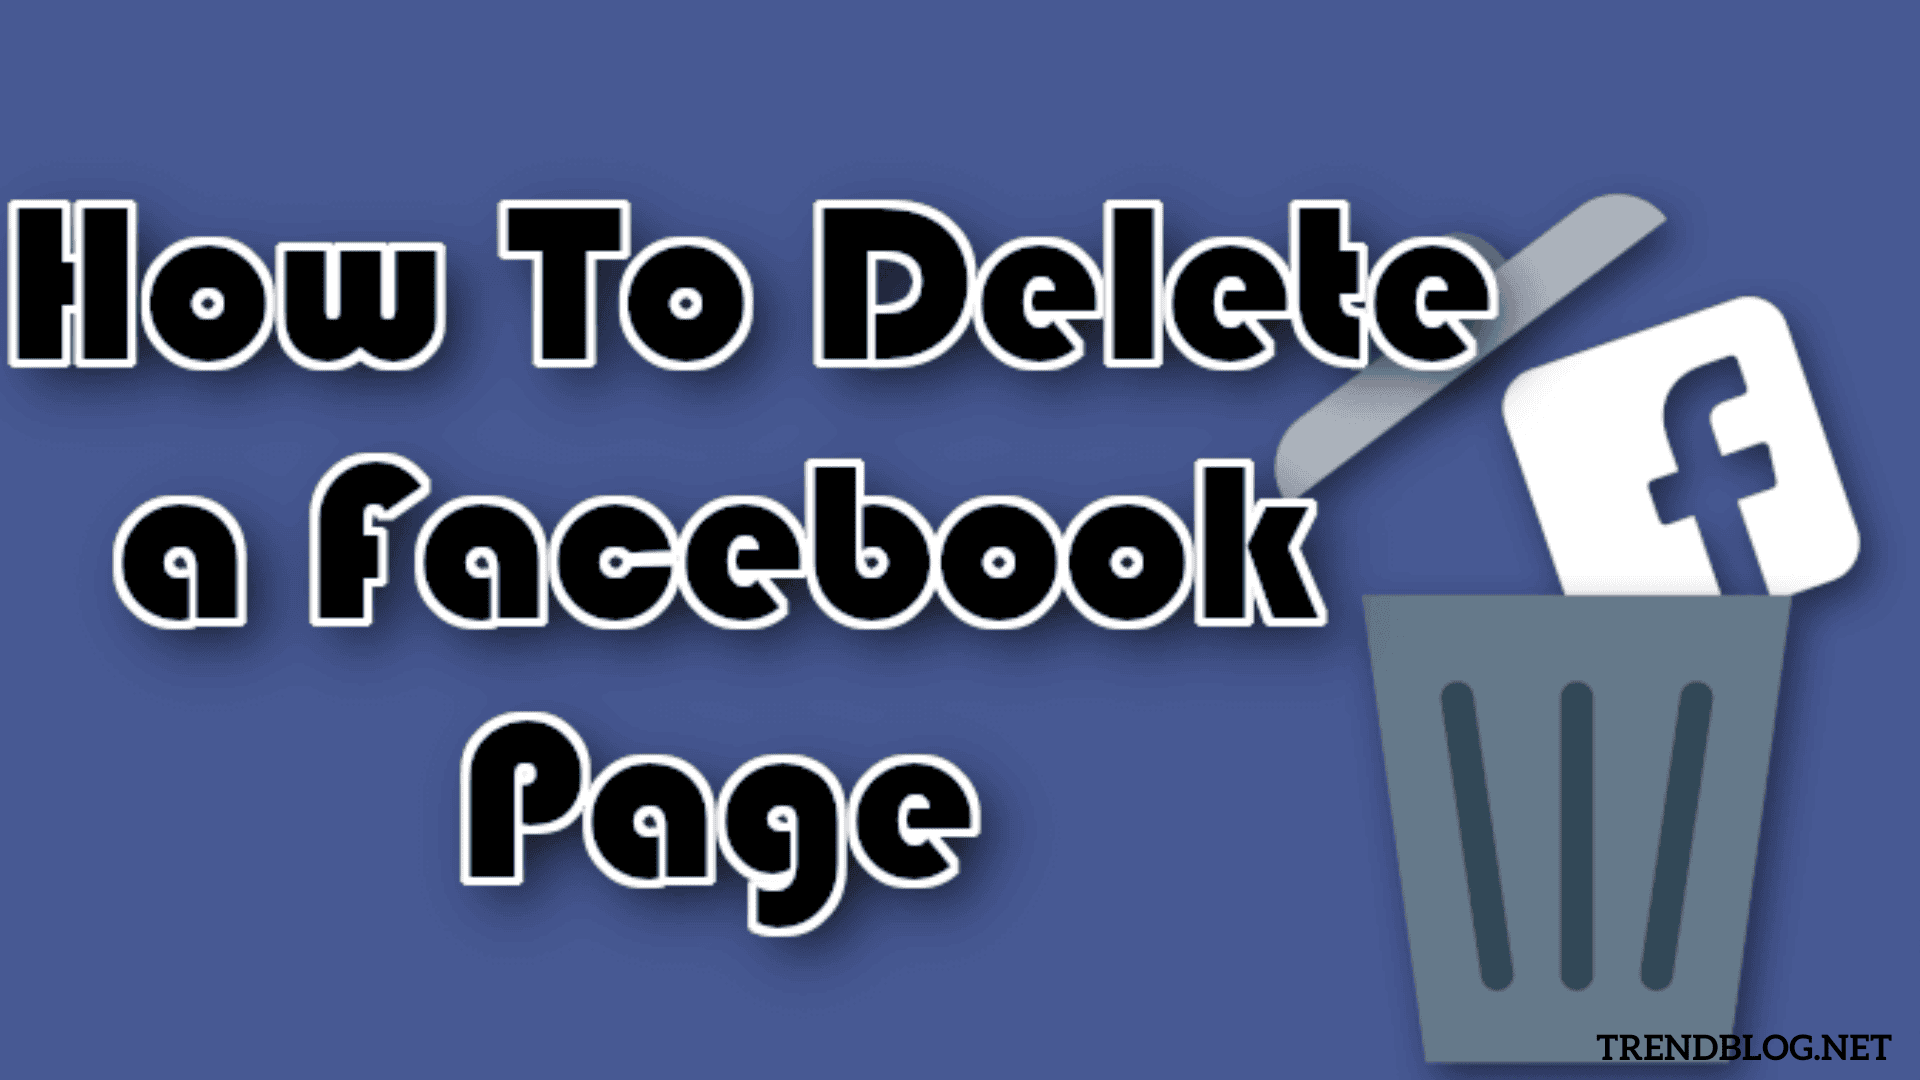  Delete Facebook Page on PC, Mobile